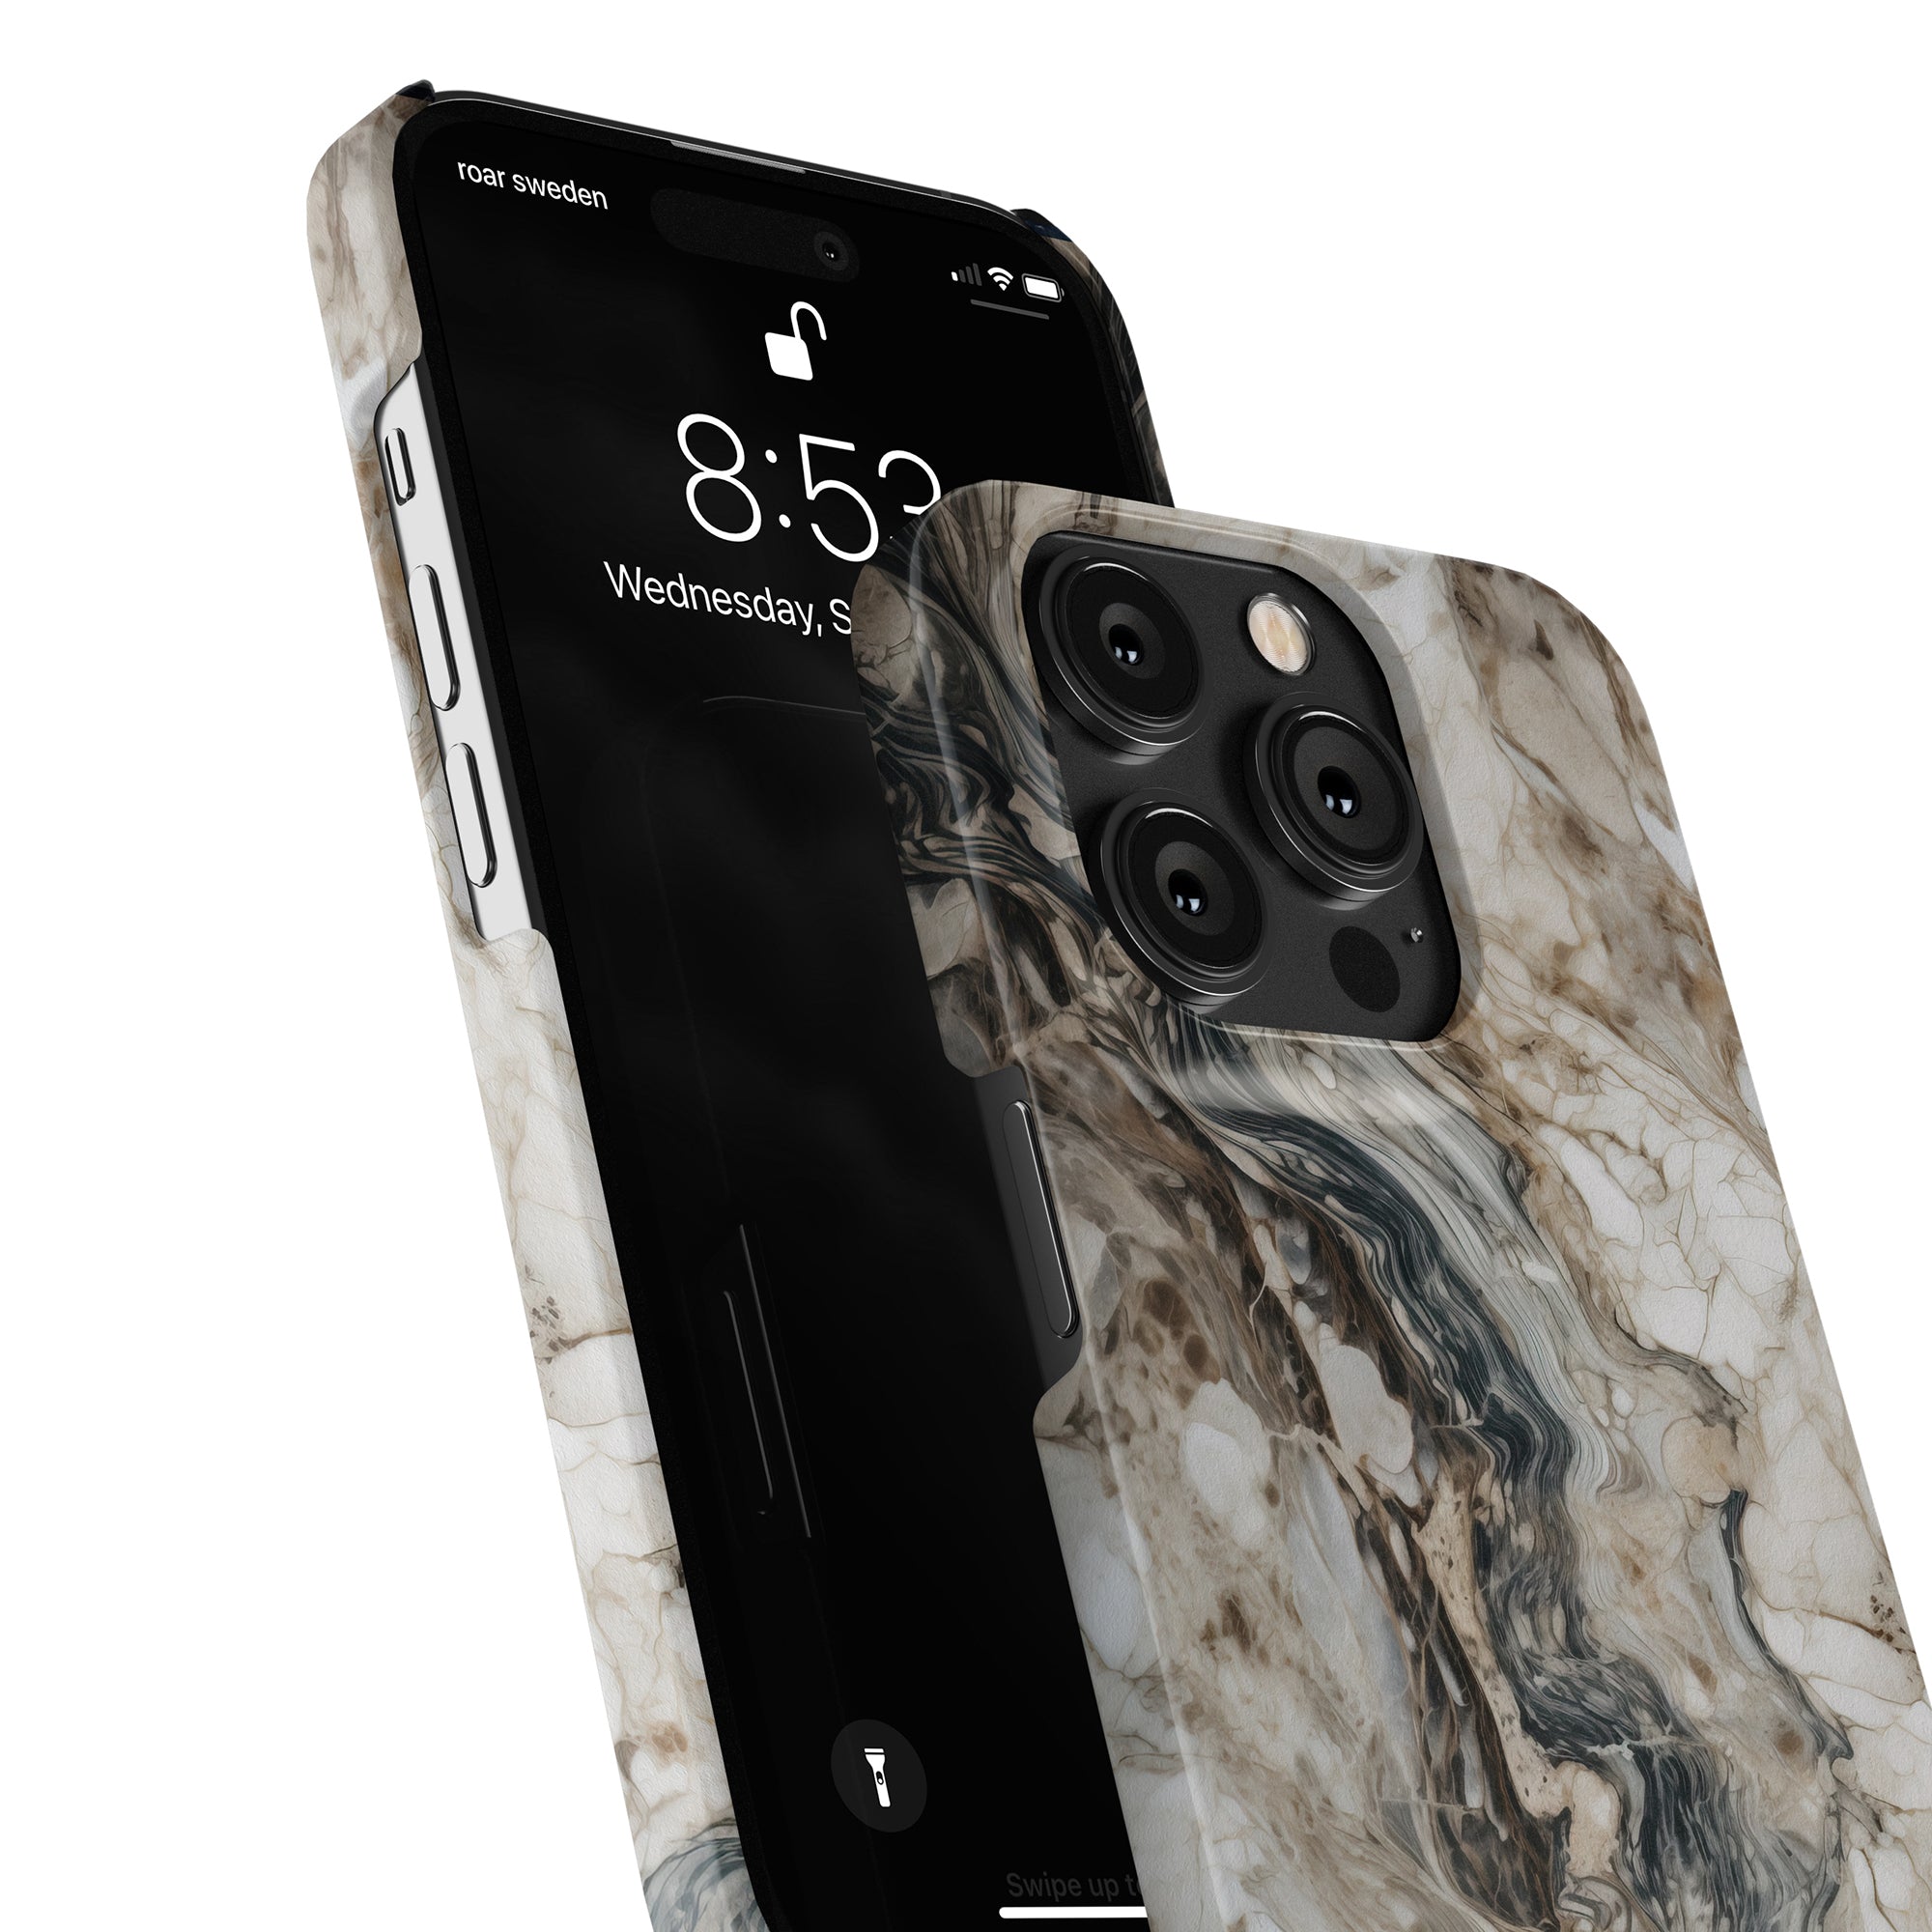 Close-up of a smartphone with a marble-patterned Napoleon - Slim case, displaying the lock screen at 8:53 AM.